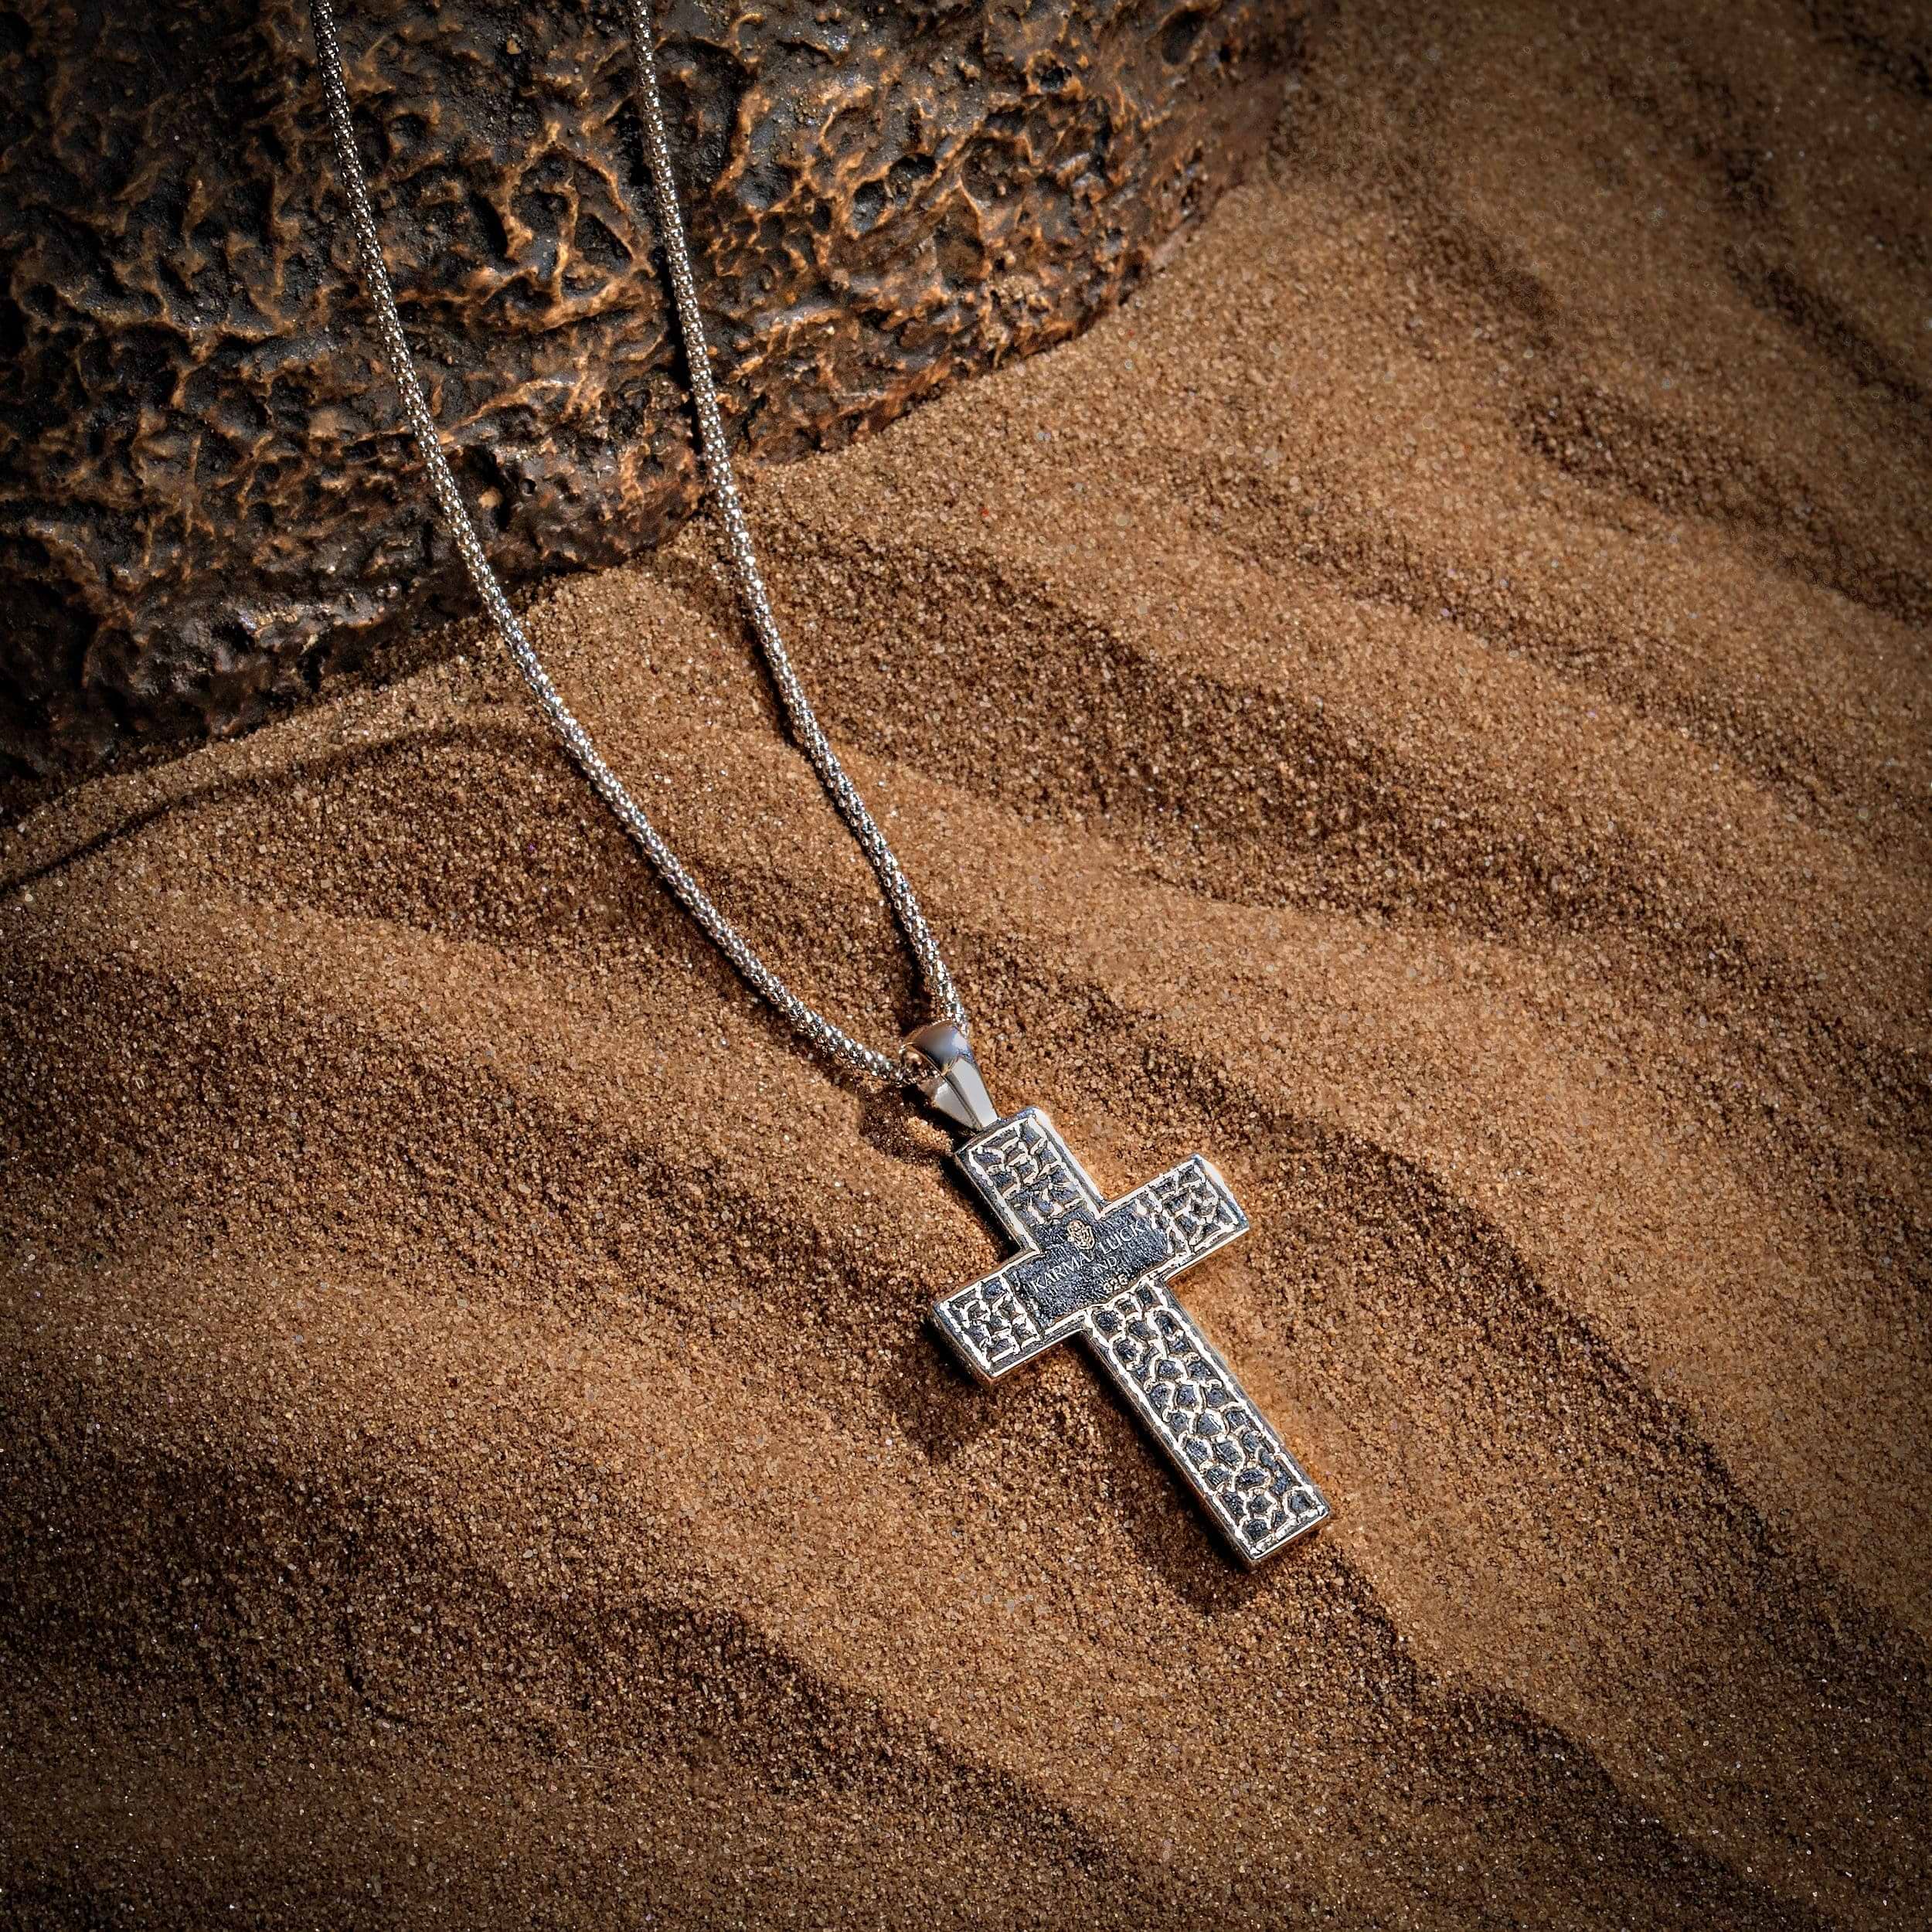 Karma and Luck  Necklace  -  Leap of Faith - Silver Cross Necklace